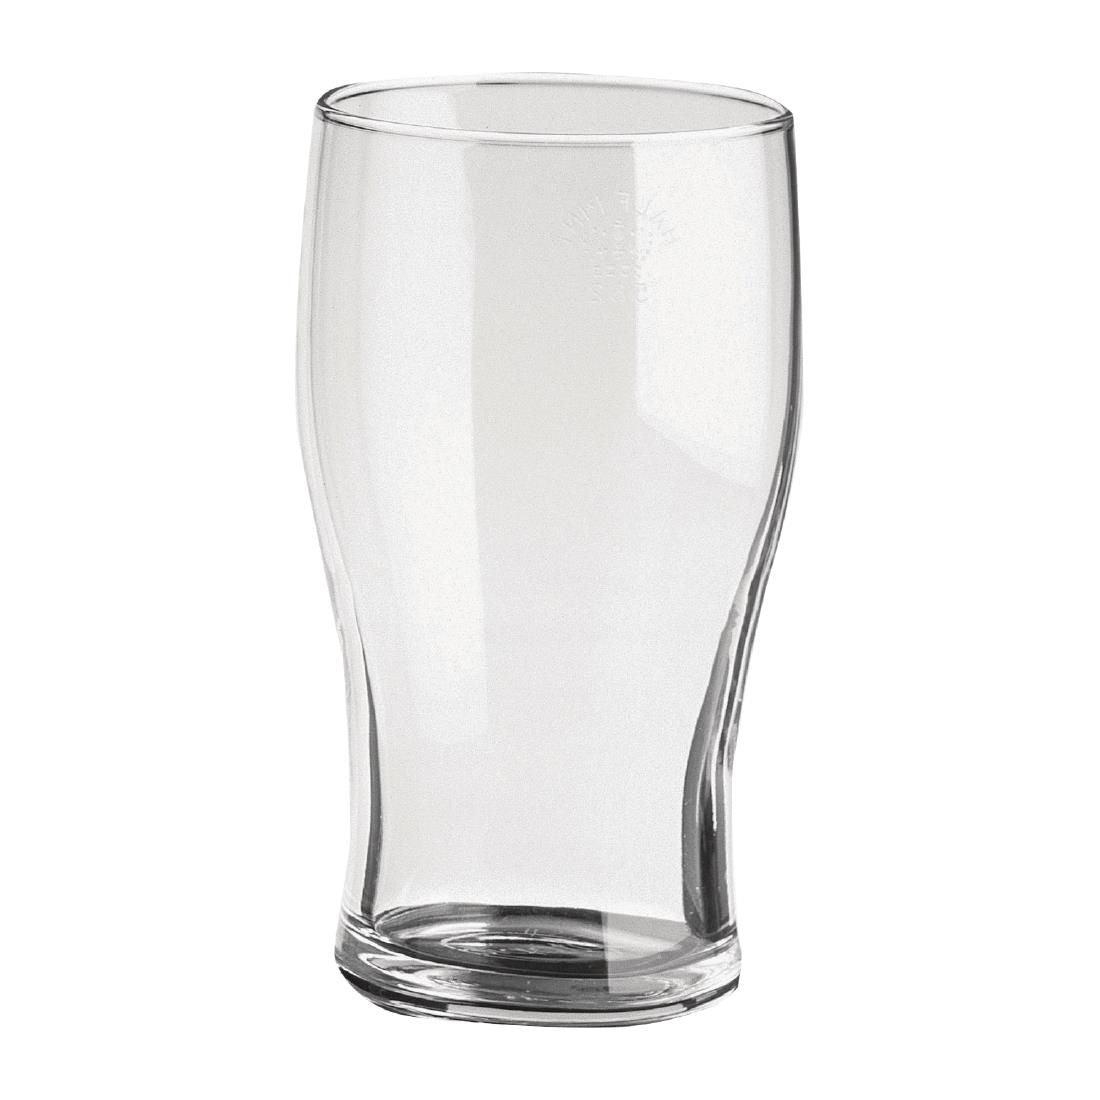 CY340 Utopia Tulip Beer Glasses 280ml CE Marked (Pack of 48) JD Catering Equipment Solutions Ltd